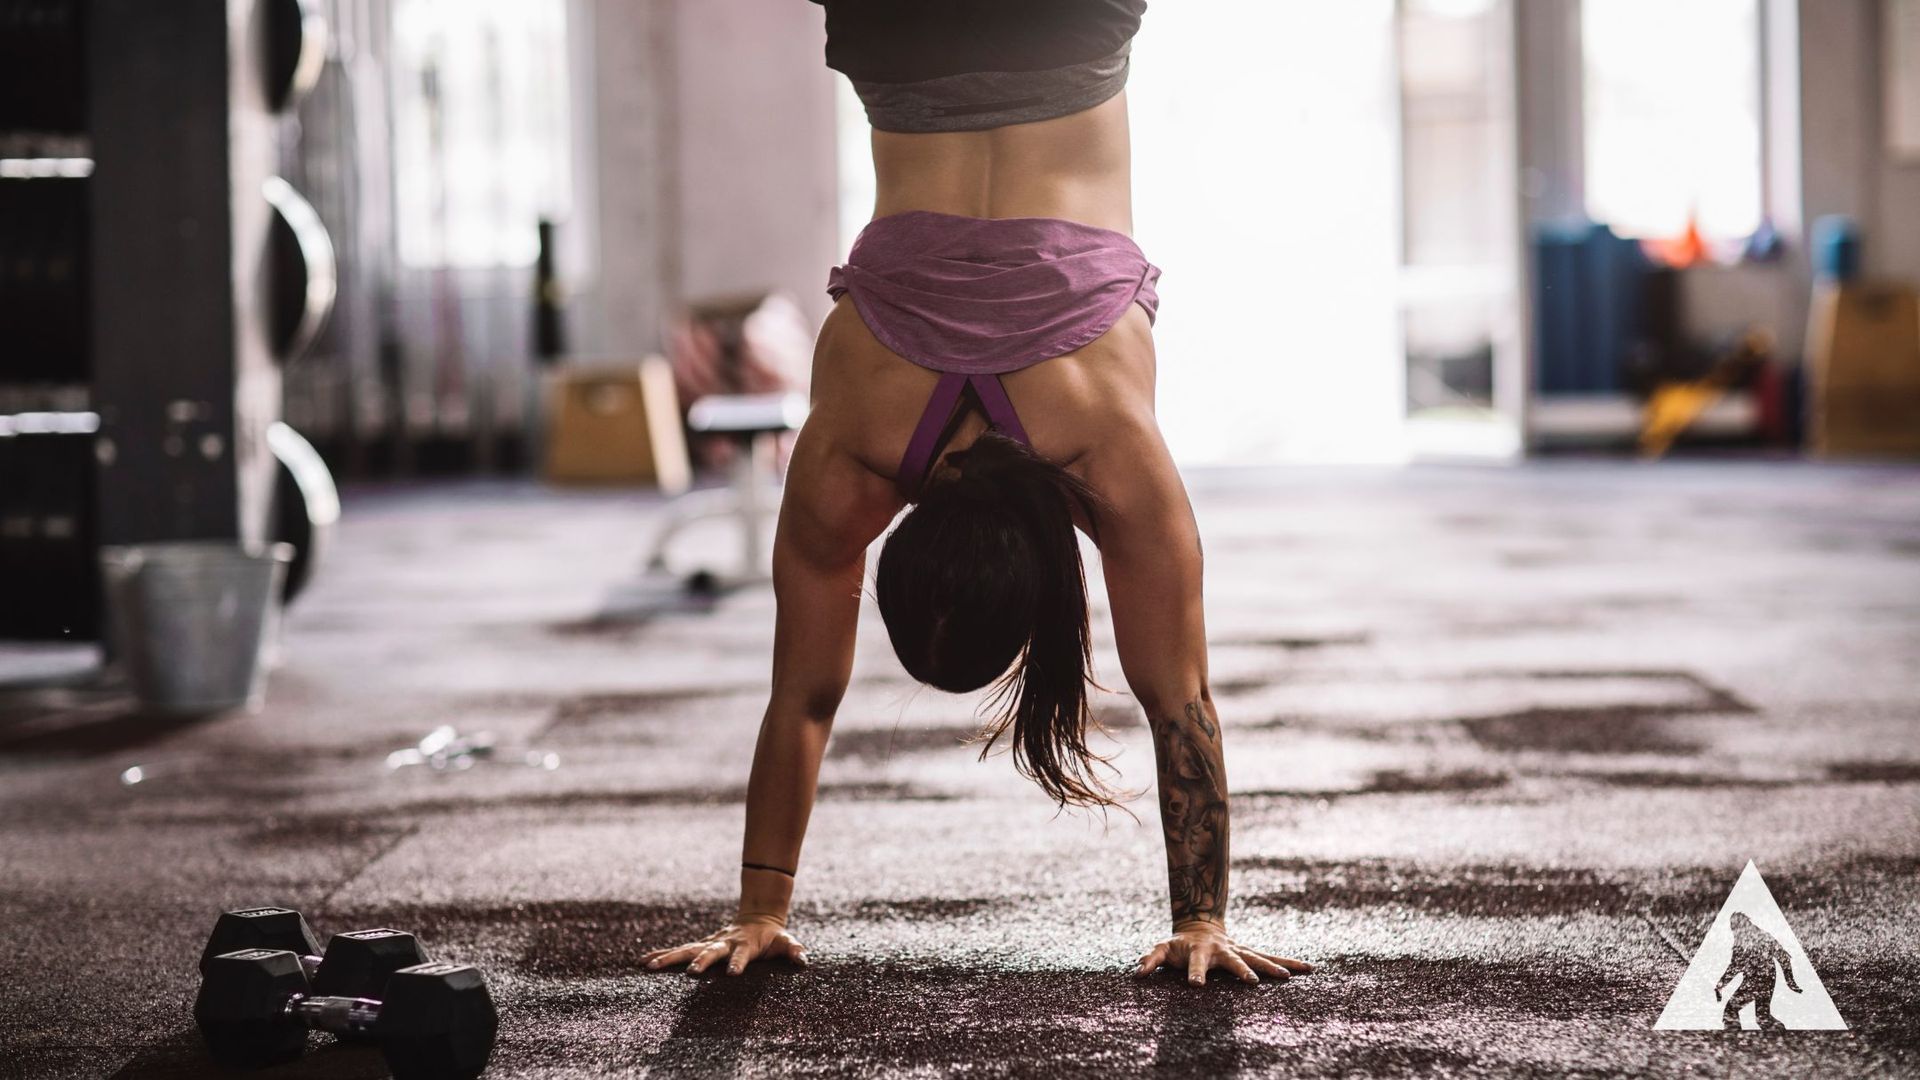 A woman is doing a handstand in a gym.